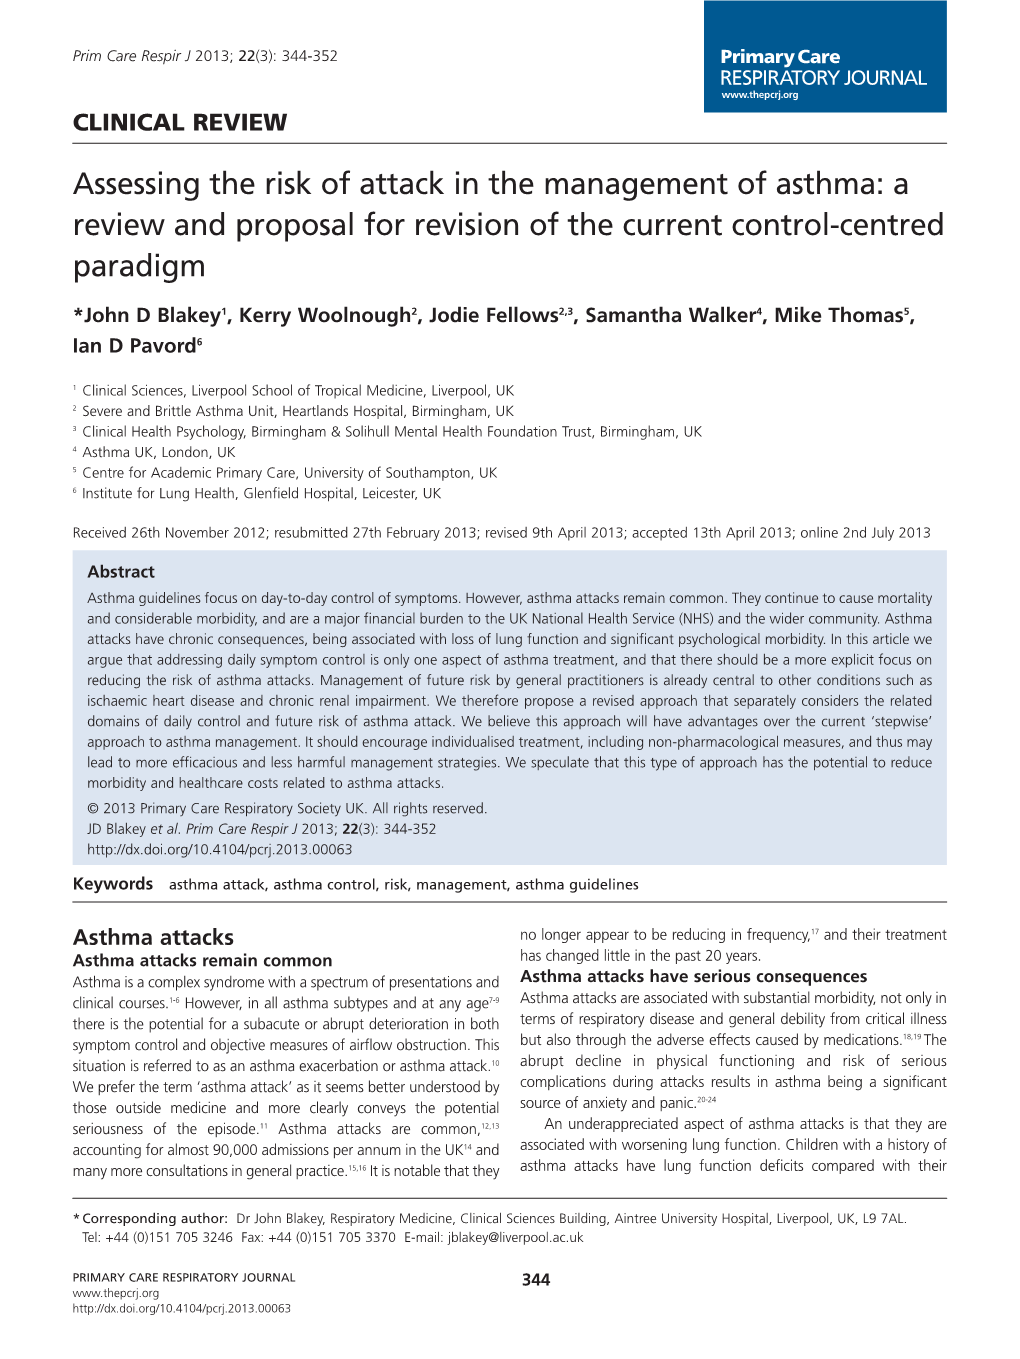 Assessing the Risk of Attack in the Management of Asthma: a Review and Proposal for Revision of the Current Control-Centred Paradigm